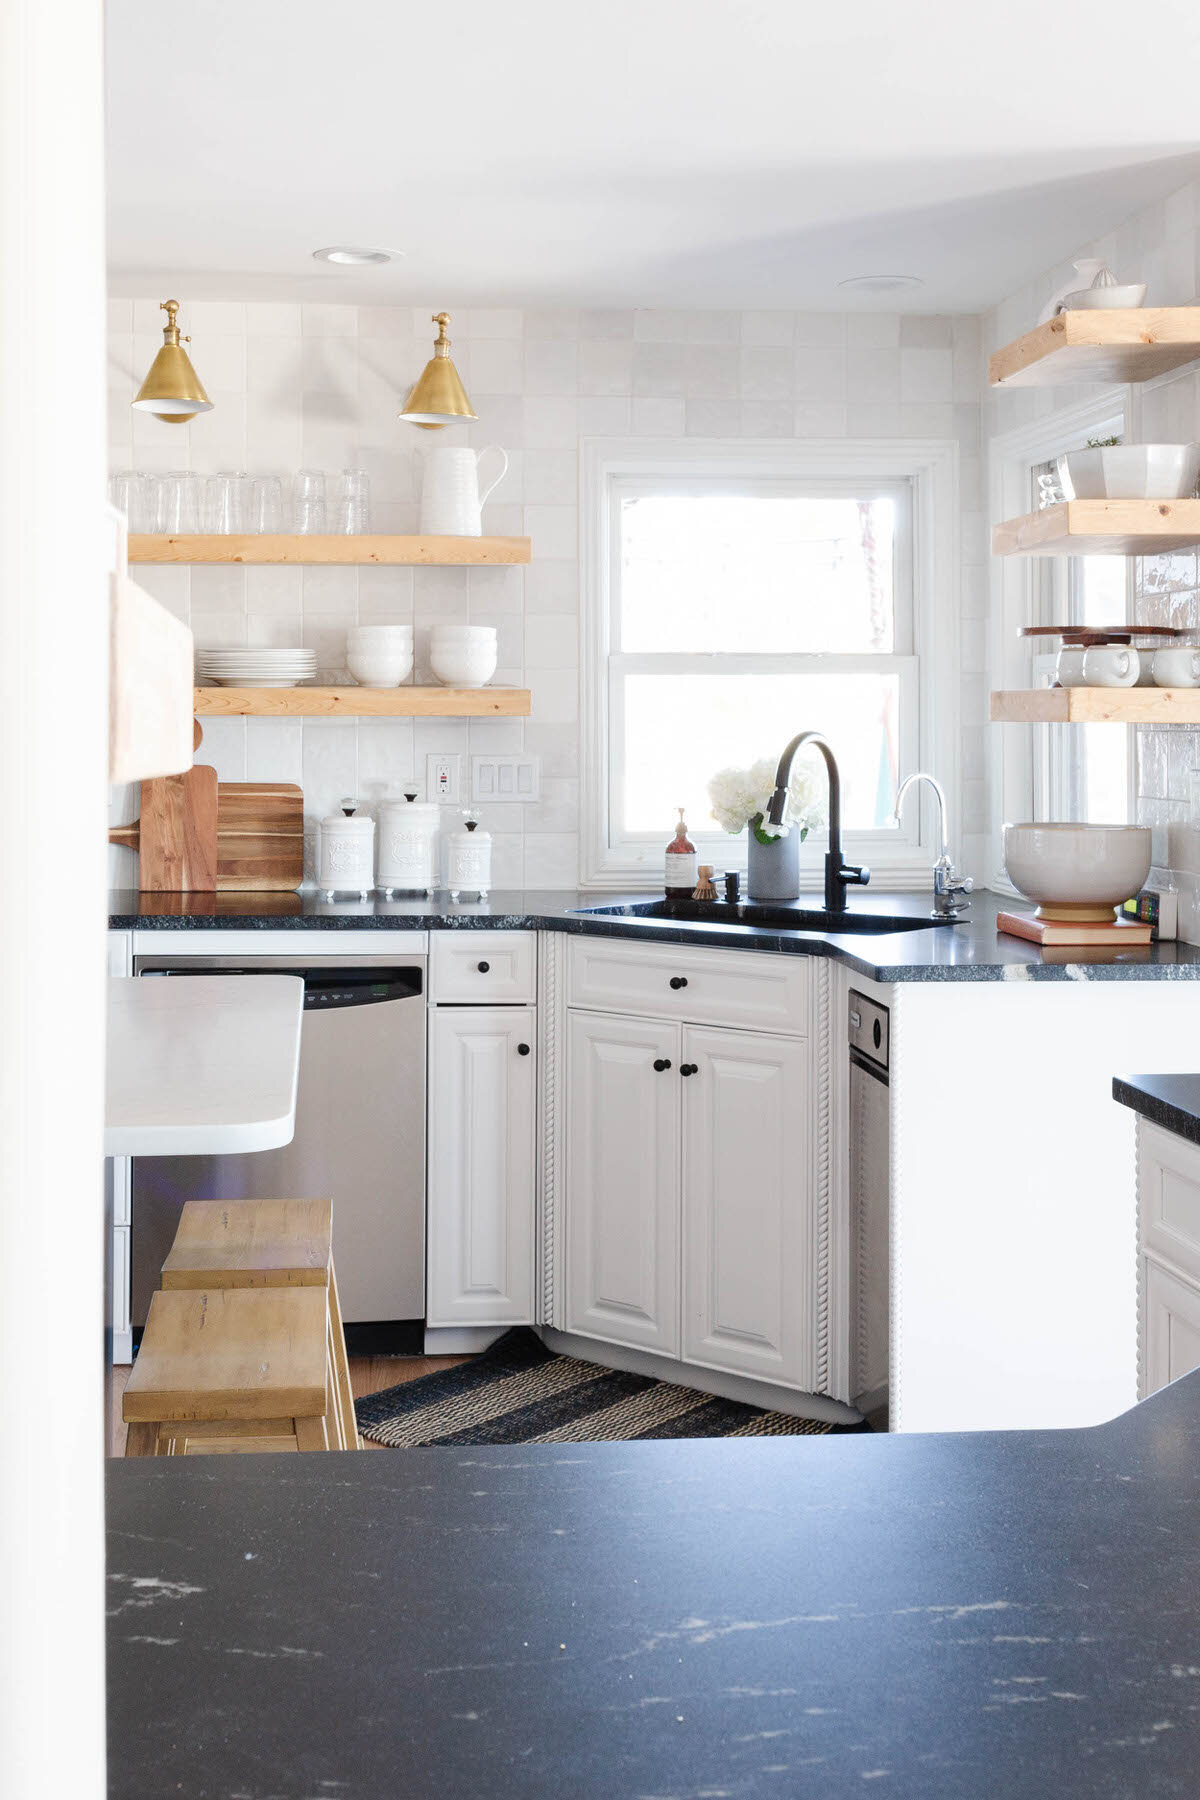 Modern Farmhouse Charming Cottage Warm White Kitchen with open shelves by Peggy Haddad Interiors37